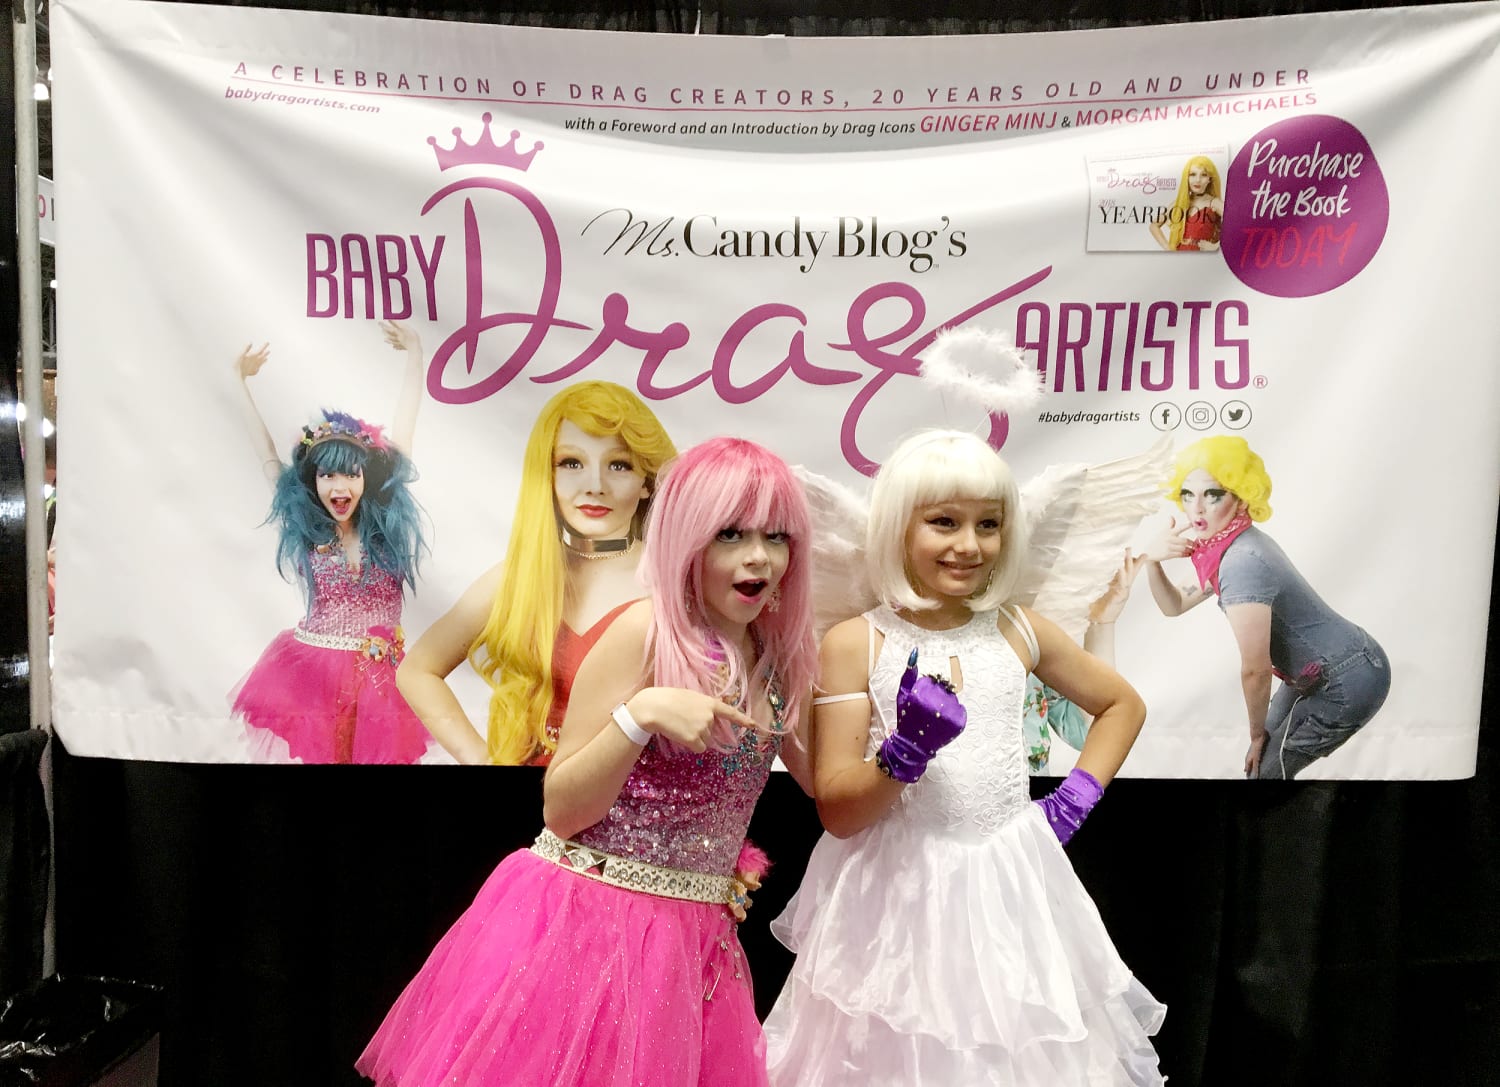 Drag kids' are slaying the runway — one 'fierce' look at a time